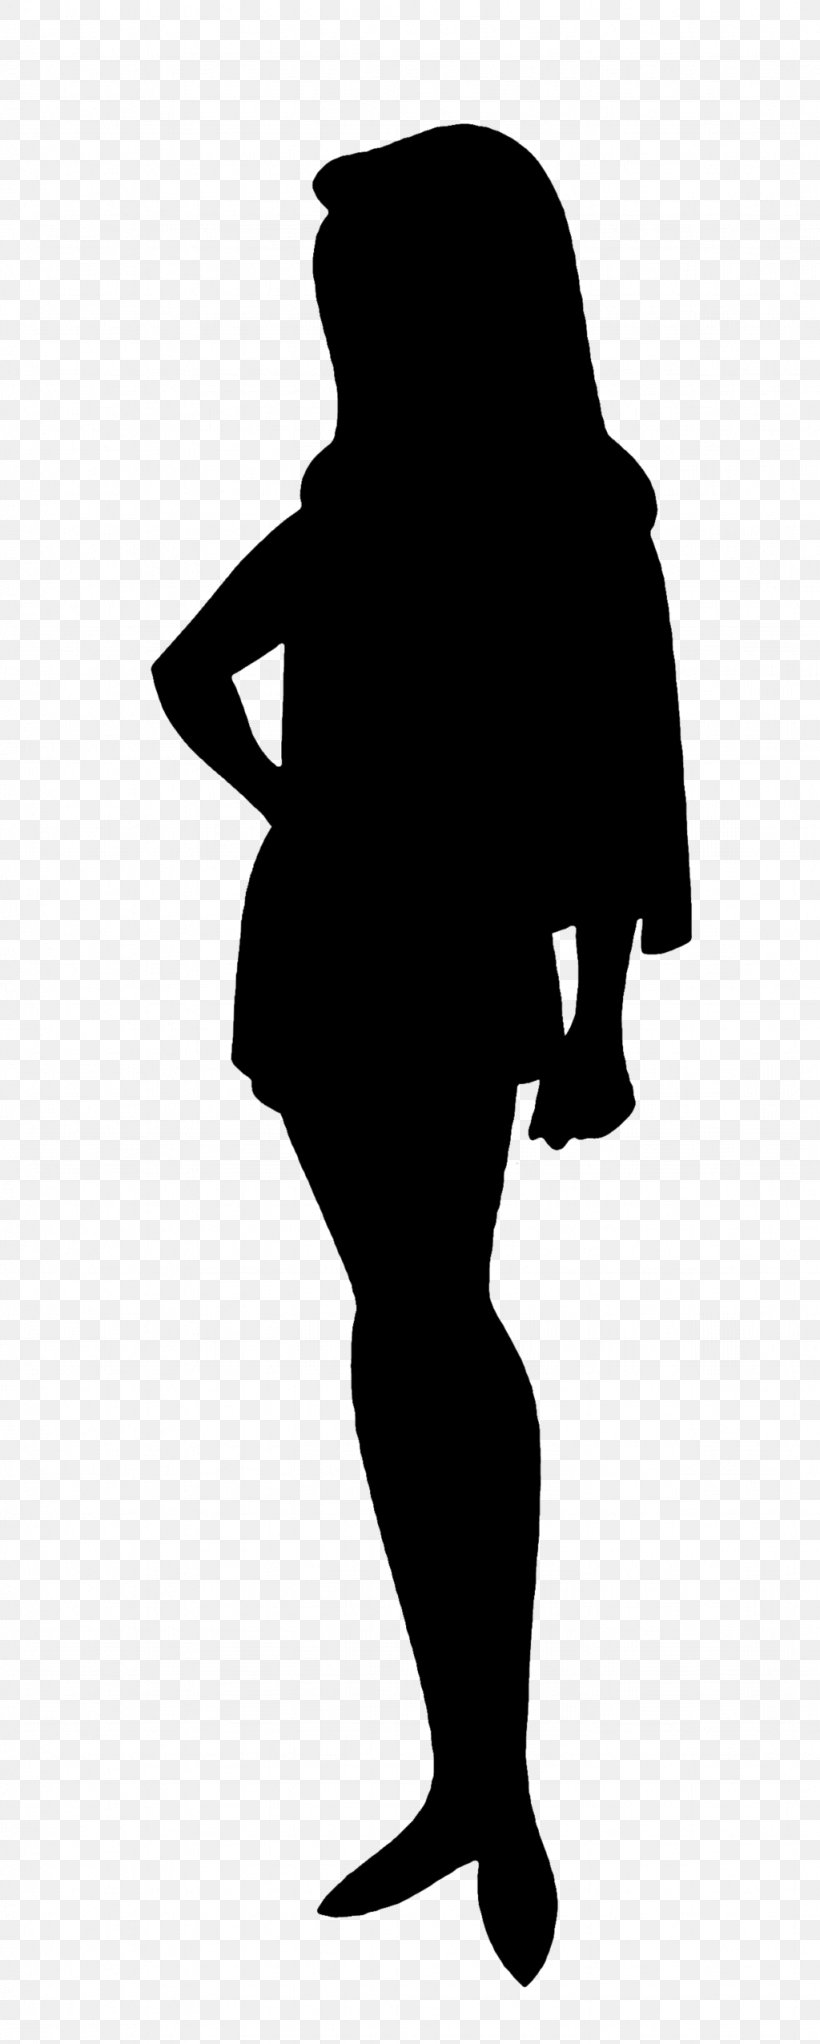 Vector Graphics Clip Art Silhouette Illustration Image, PNG, 1024x2553px, Silhouette, Black, Black Hair, Blackandwhite, Drawing Download Free